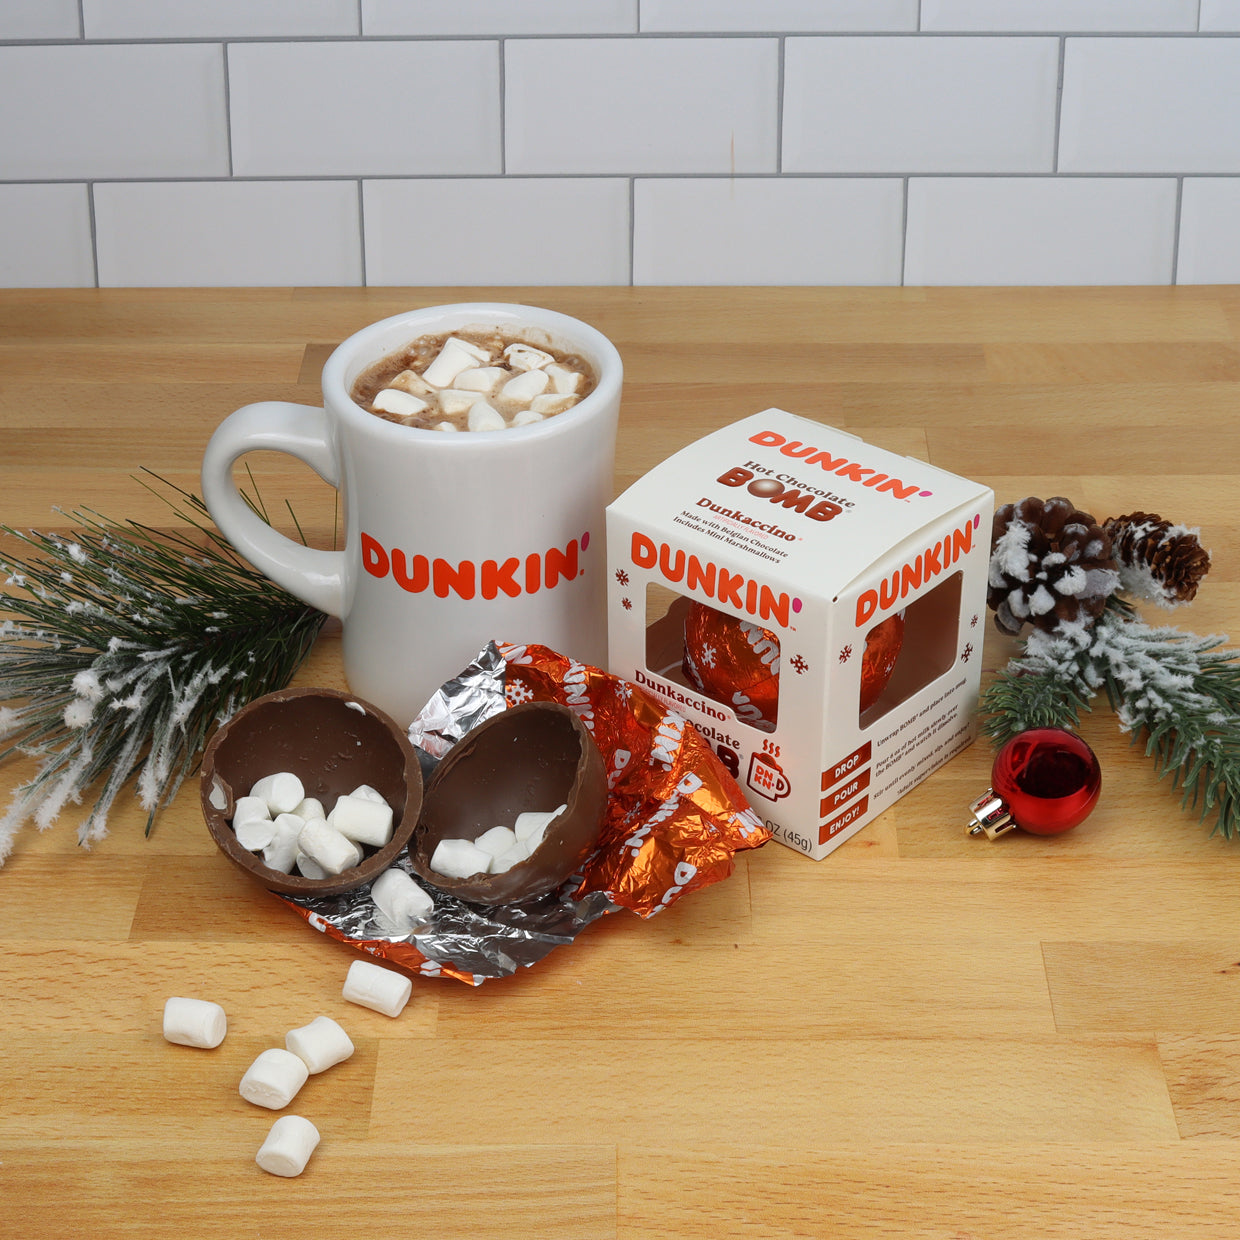 White Dunkin' mug with hot chocolate and mini marshmallows, white Christmas themed box with orange foil with Dunkin' logo wrapped hot chocolate bomb, and open hot chocolate bomb with mini marshmallows 